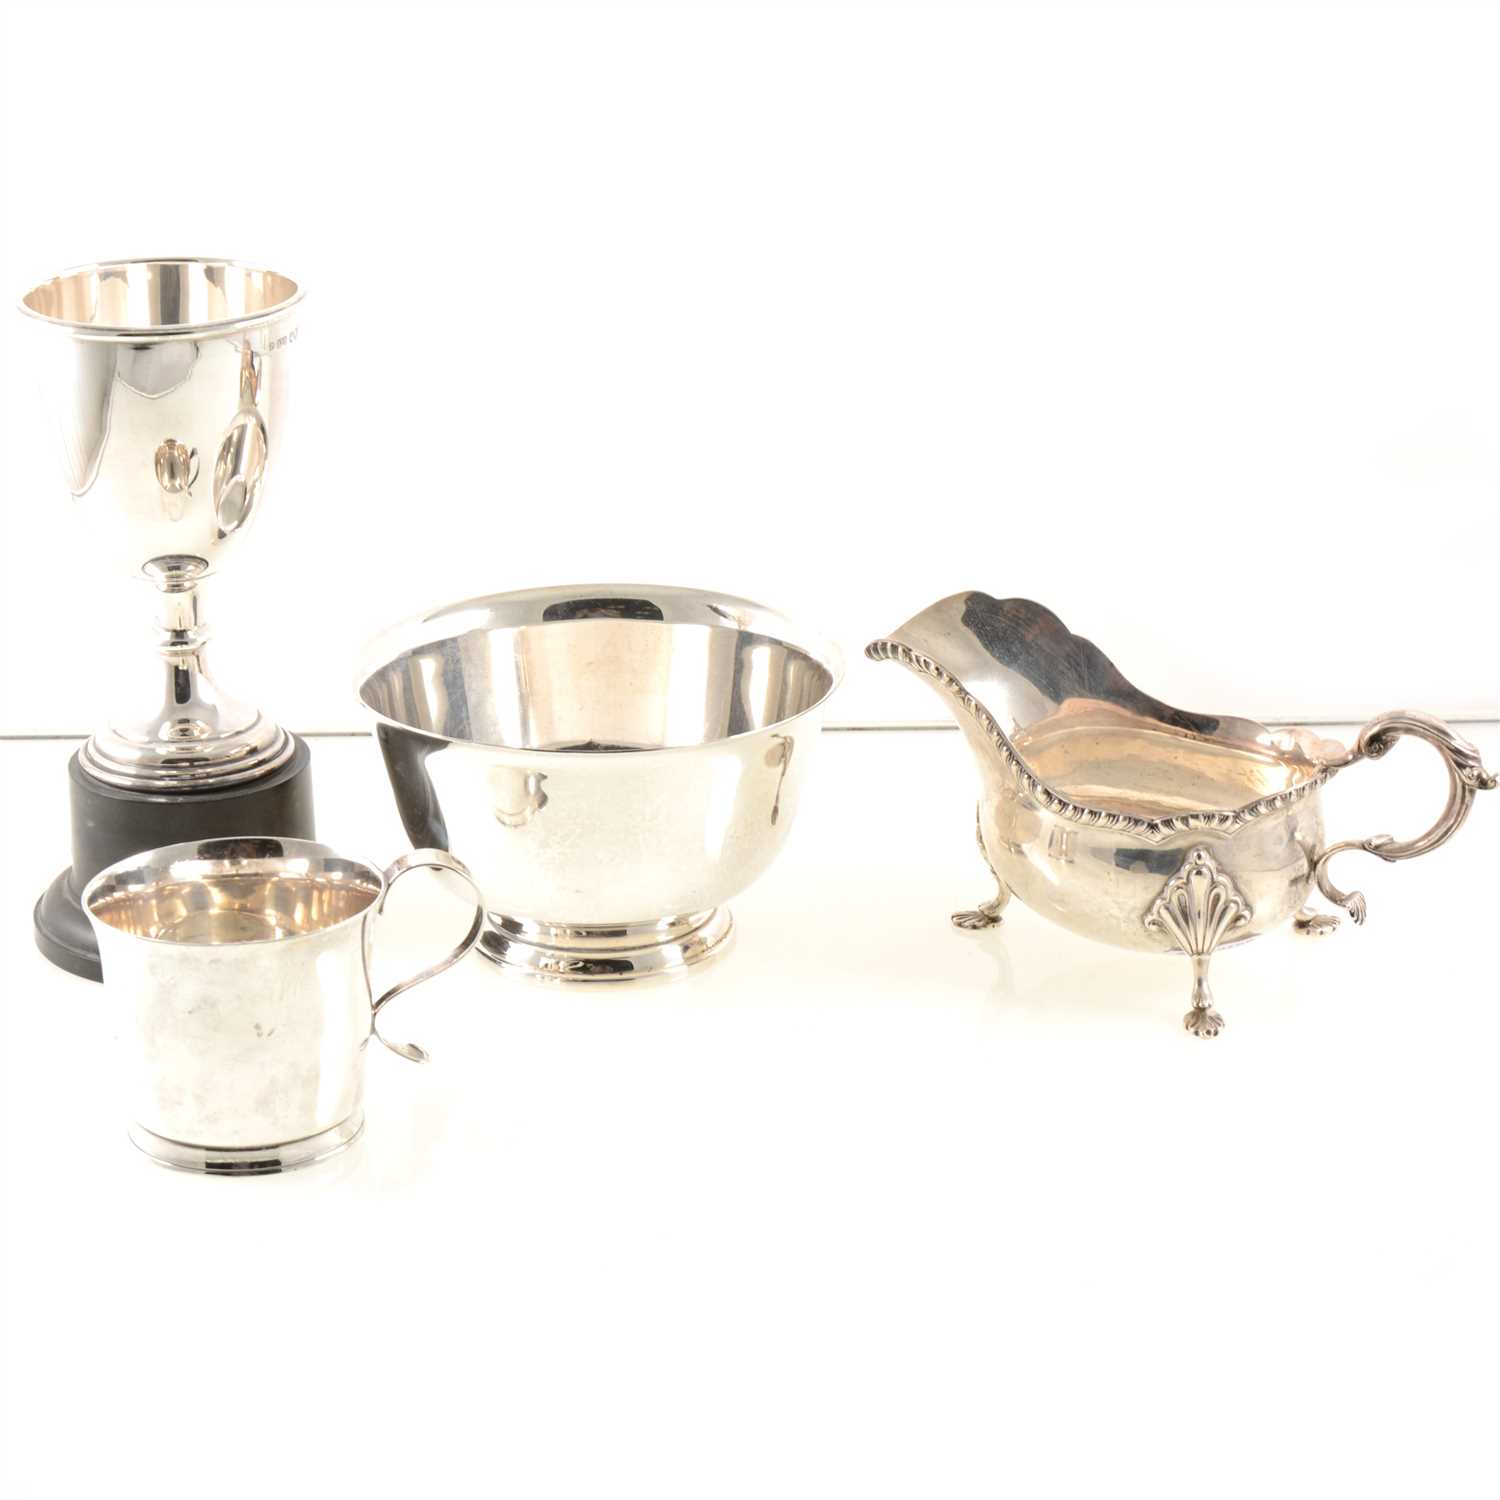 Lot 209 - A silver trophy by Pinder Brothers, engraved "Great Glenn Gymkhana 1955 1st Handy Hunter Trial", black plastic plinth, Sheffield 1950, a silver sauce boat by Barker Brothers Silver Ltd, gadroon edge